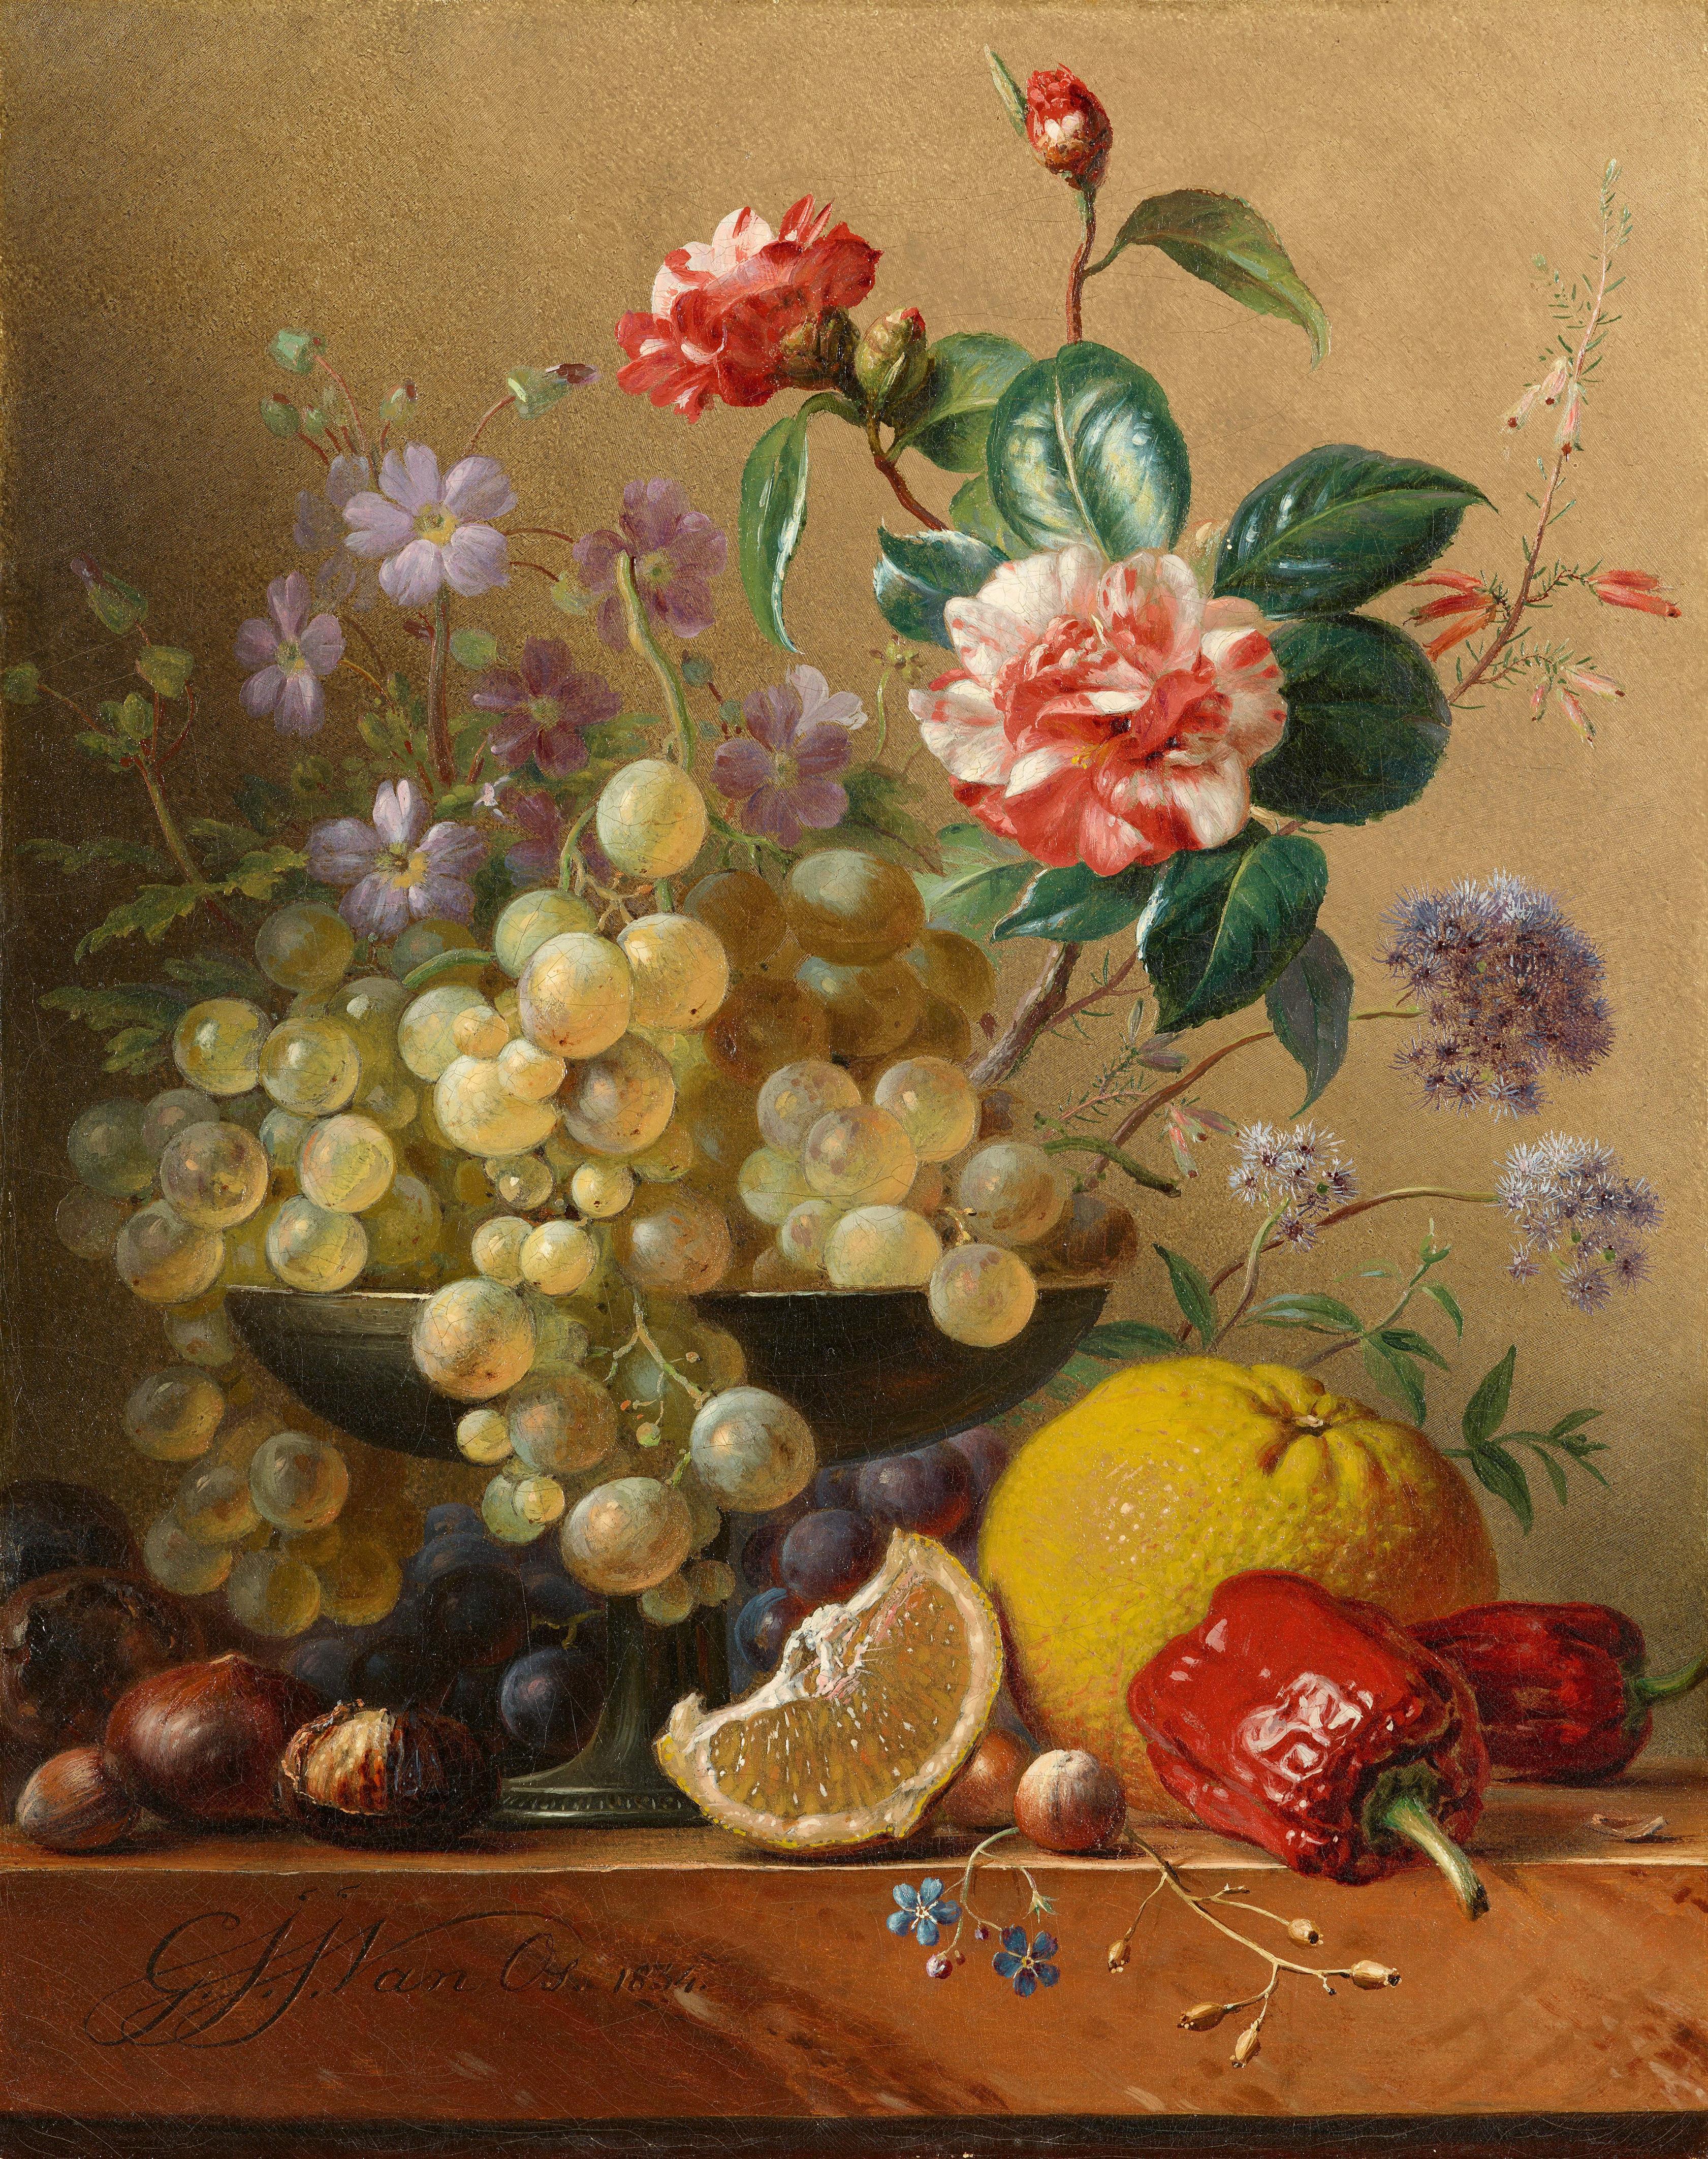 Georg Jacob Johannes van Os - Still Life with Grapes in a Silver Dish, Camelia Sprig, Lemon, Bell Pepper, Chestnuts, and Nuts on a Marble Slab - image-1